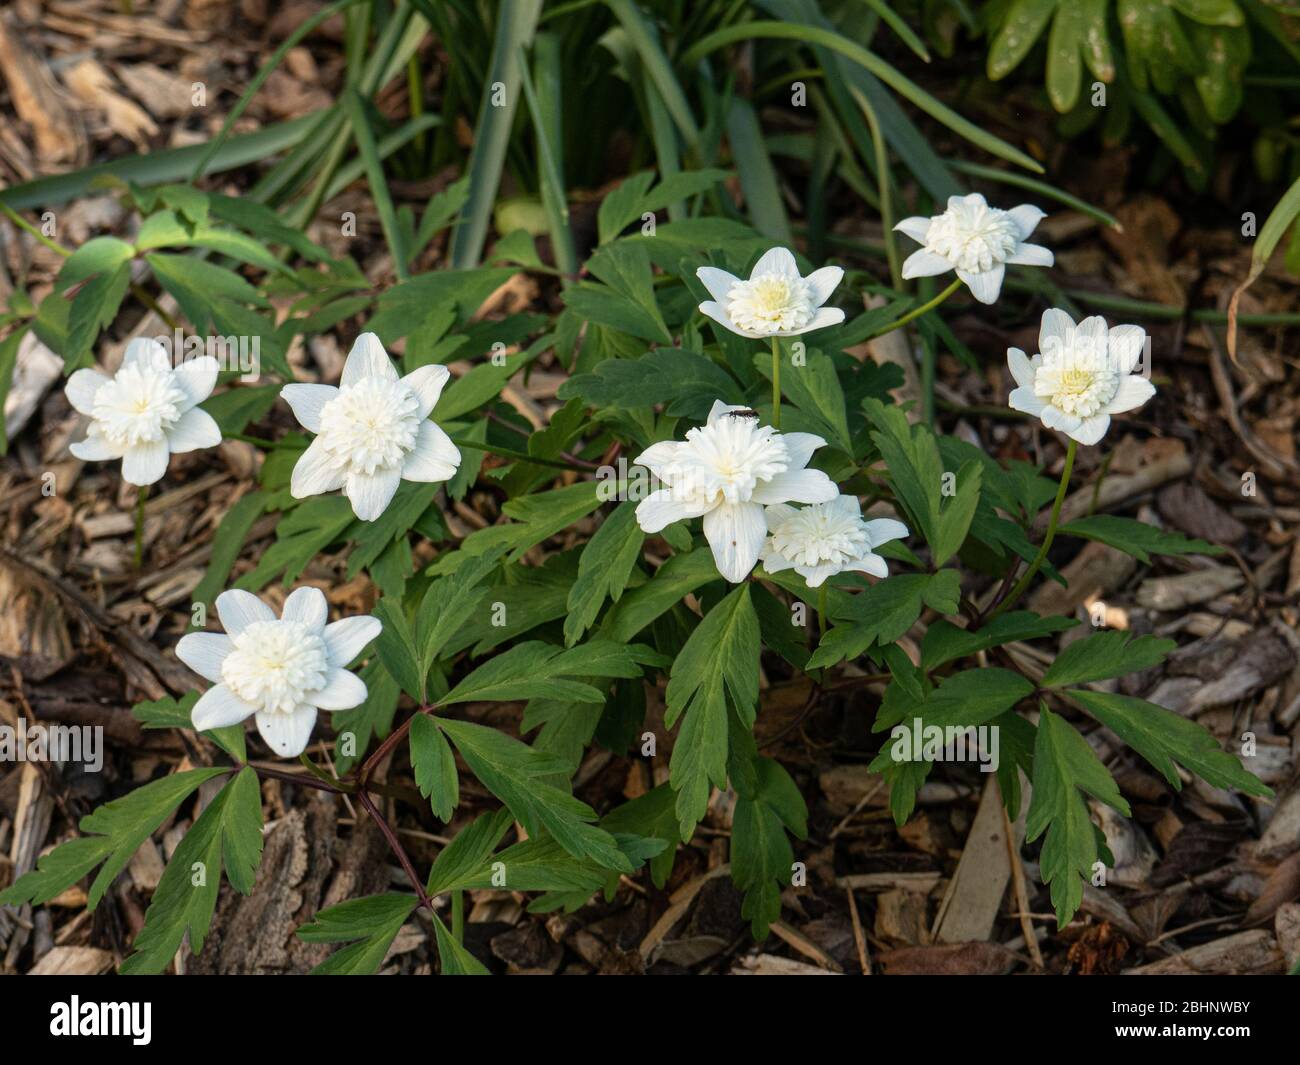 The flowers and foliage of the wood anemone Anemone nemerosa Vestial showing the frilled double flowers and the deeply incised foliage Stock Photo